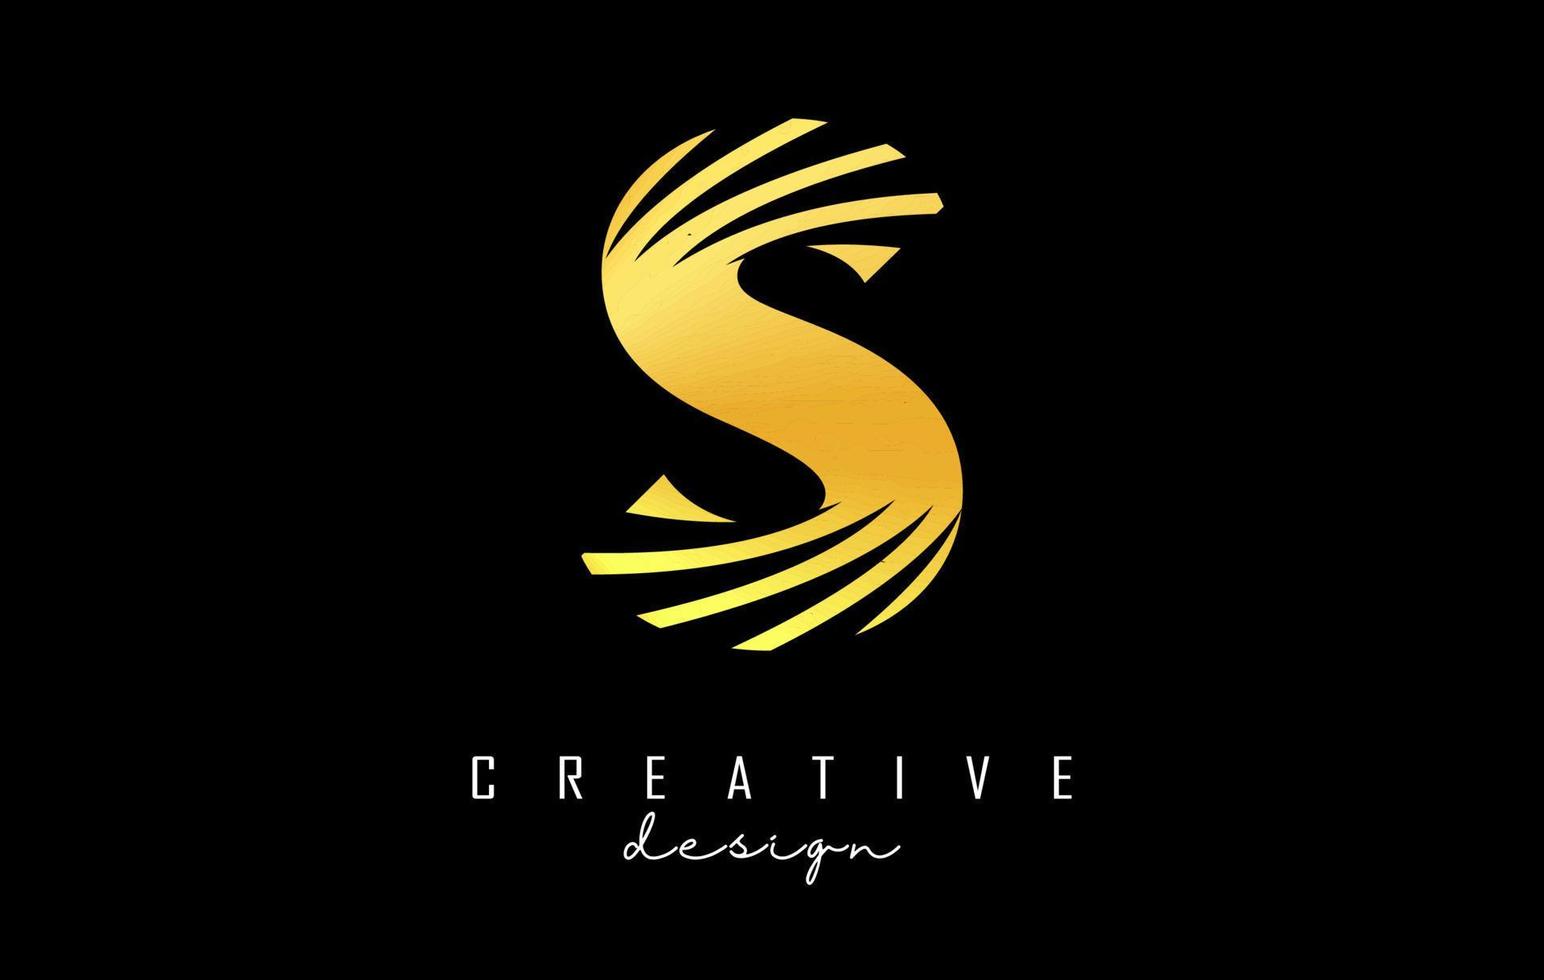 Golden letter S logo with leading lines and negative space design. Letter with geometric and creative cuts concept. vector